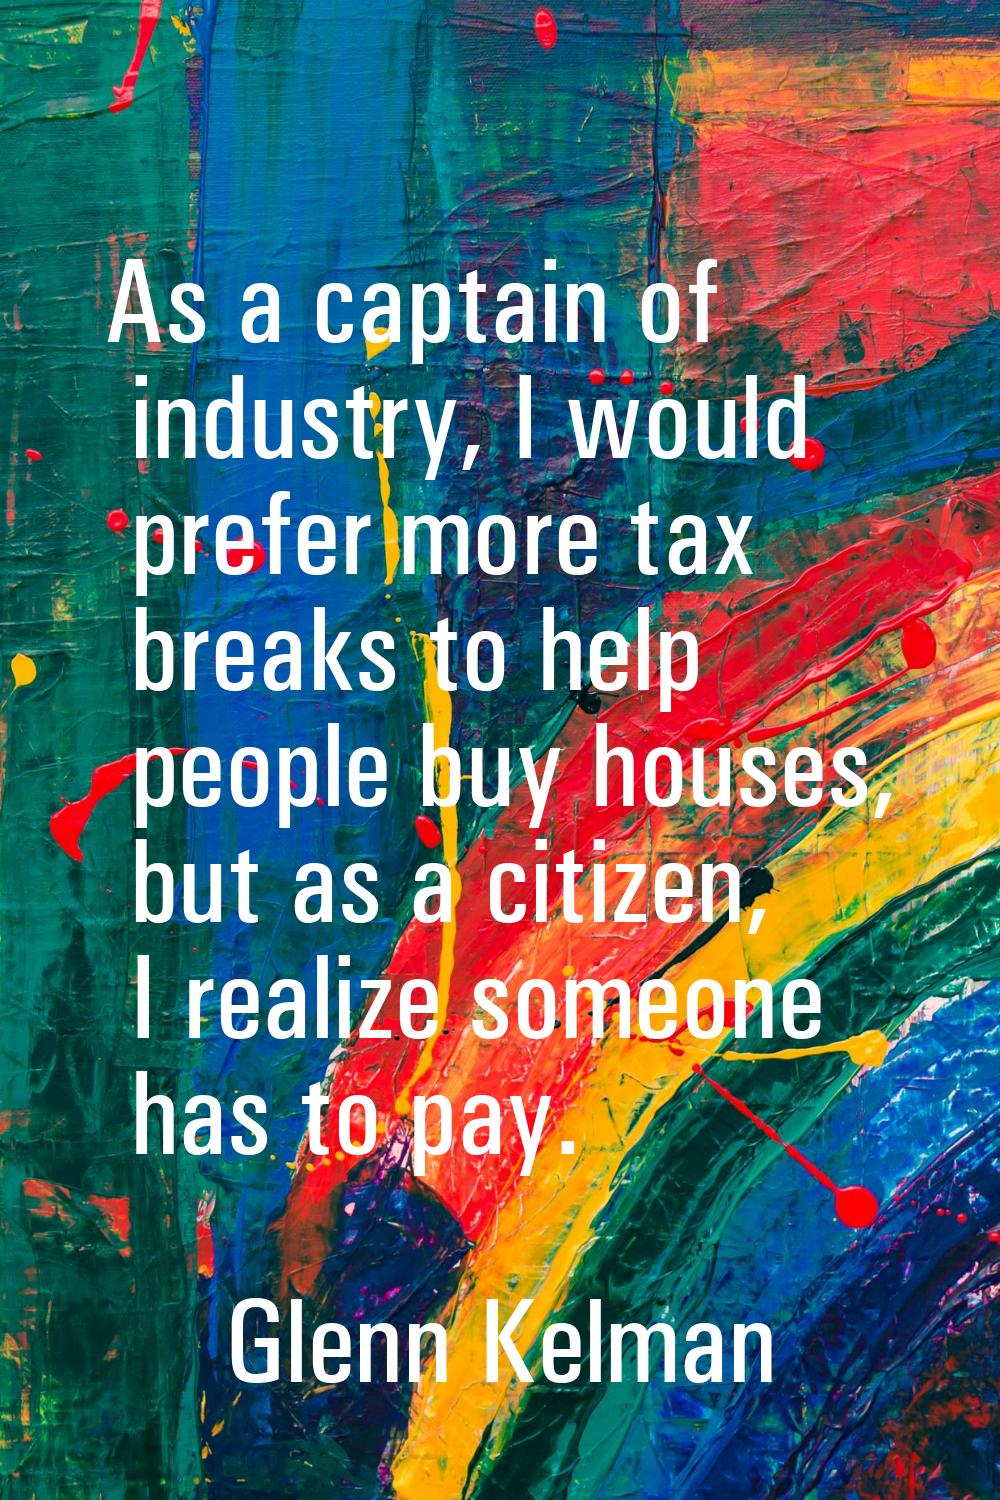 As a captain of industry, I would prefer more tax breaks to help people buy houses, but as a citize